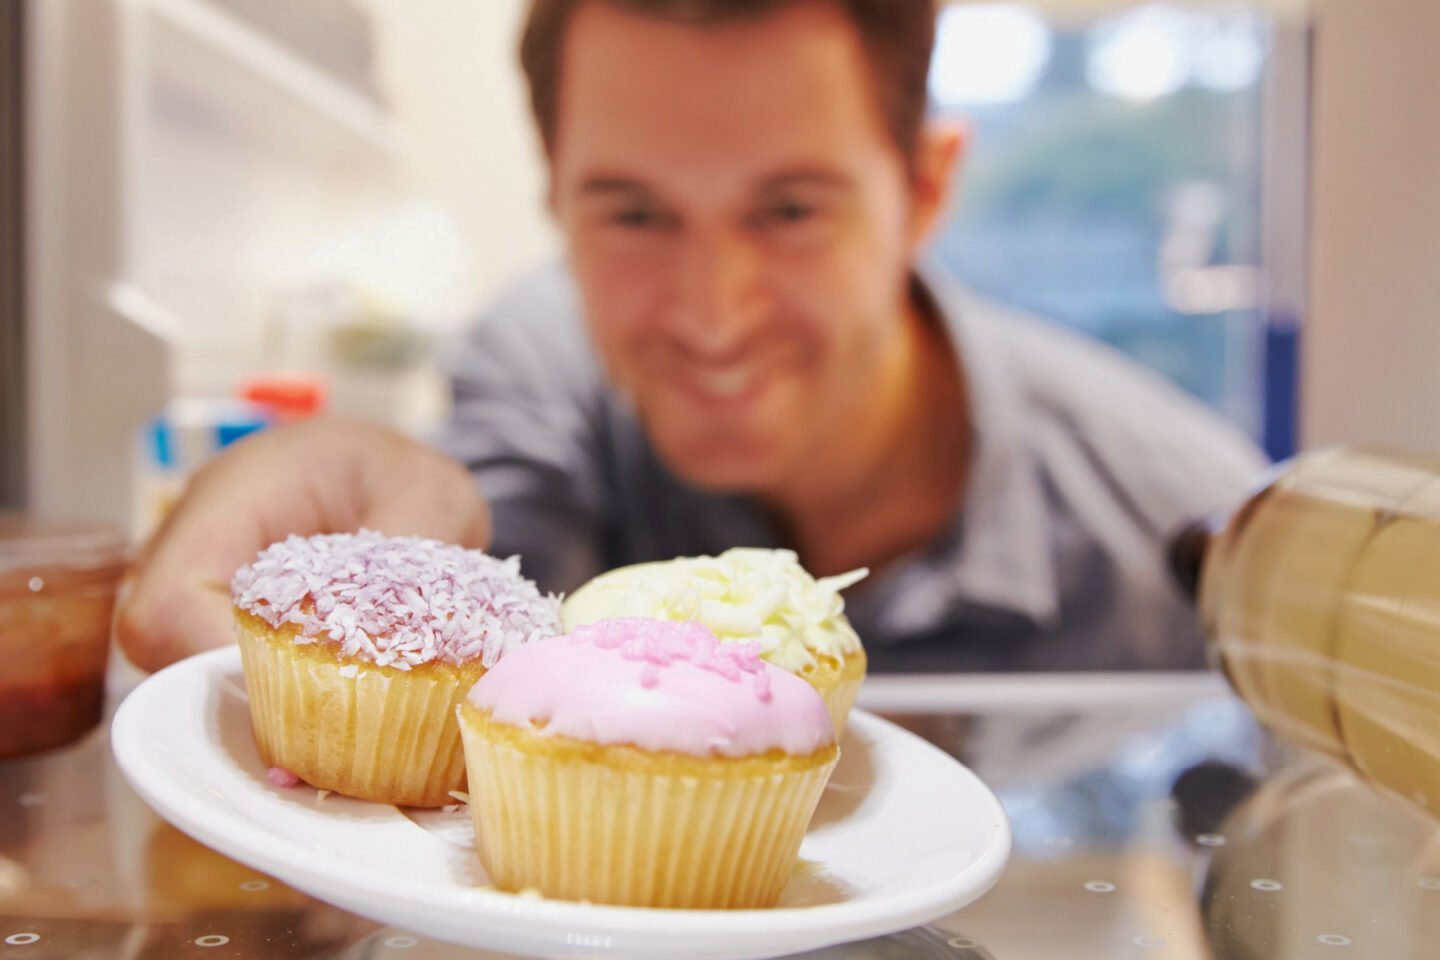 man places a plate of frosted cupcakes in the fridge